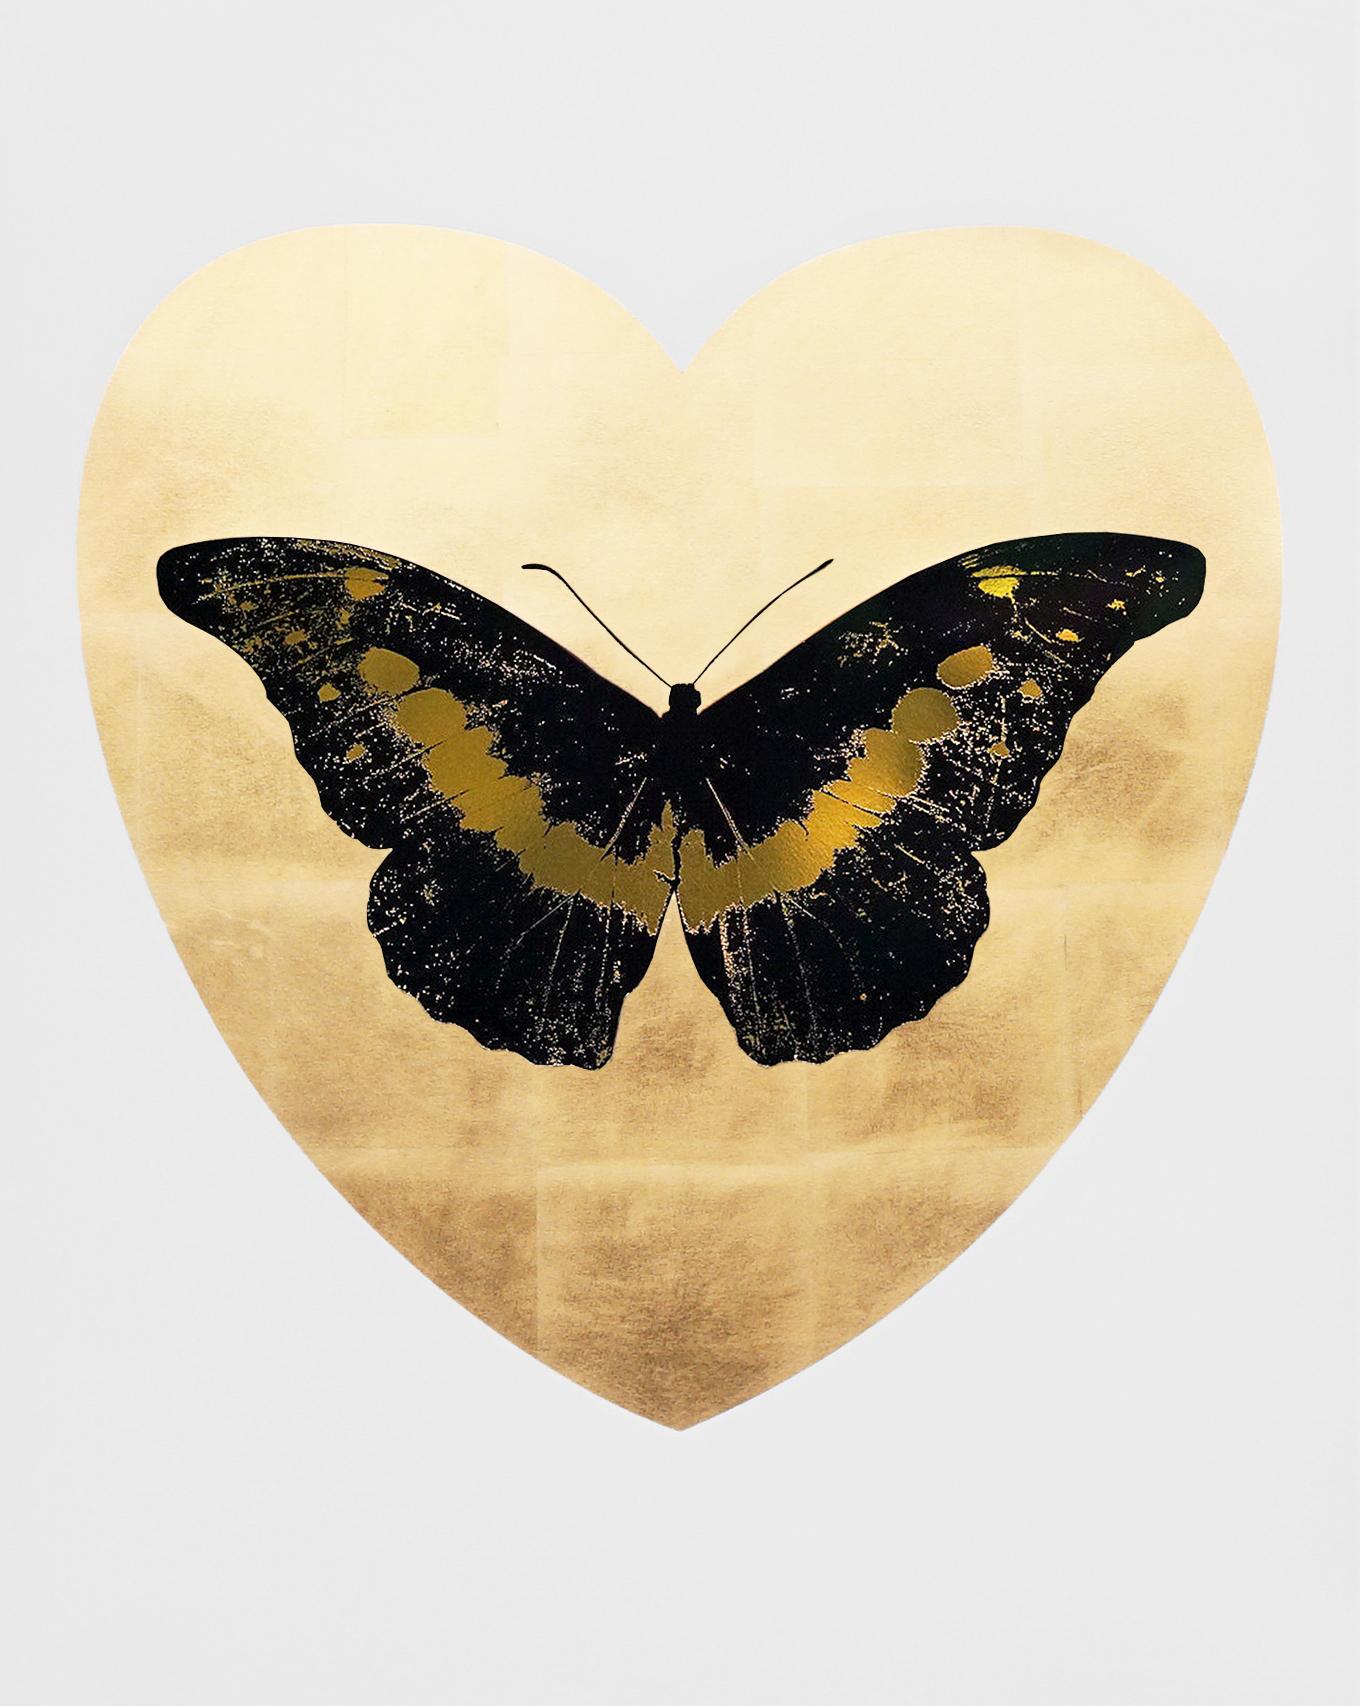 Damien Hirst, 'I Love You' Butterfly, Black/Gold, 2015 1